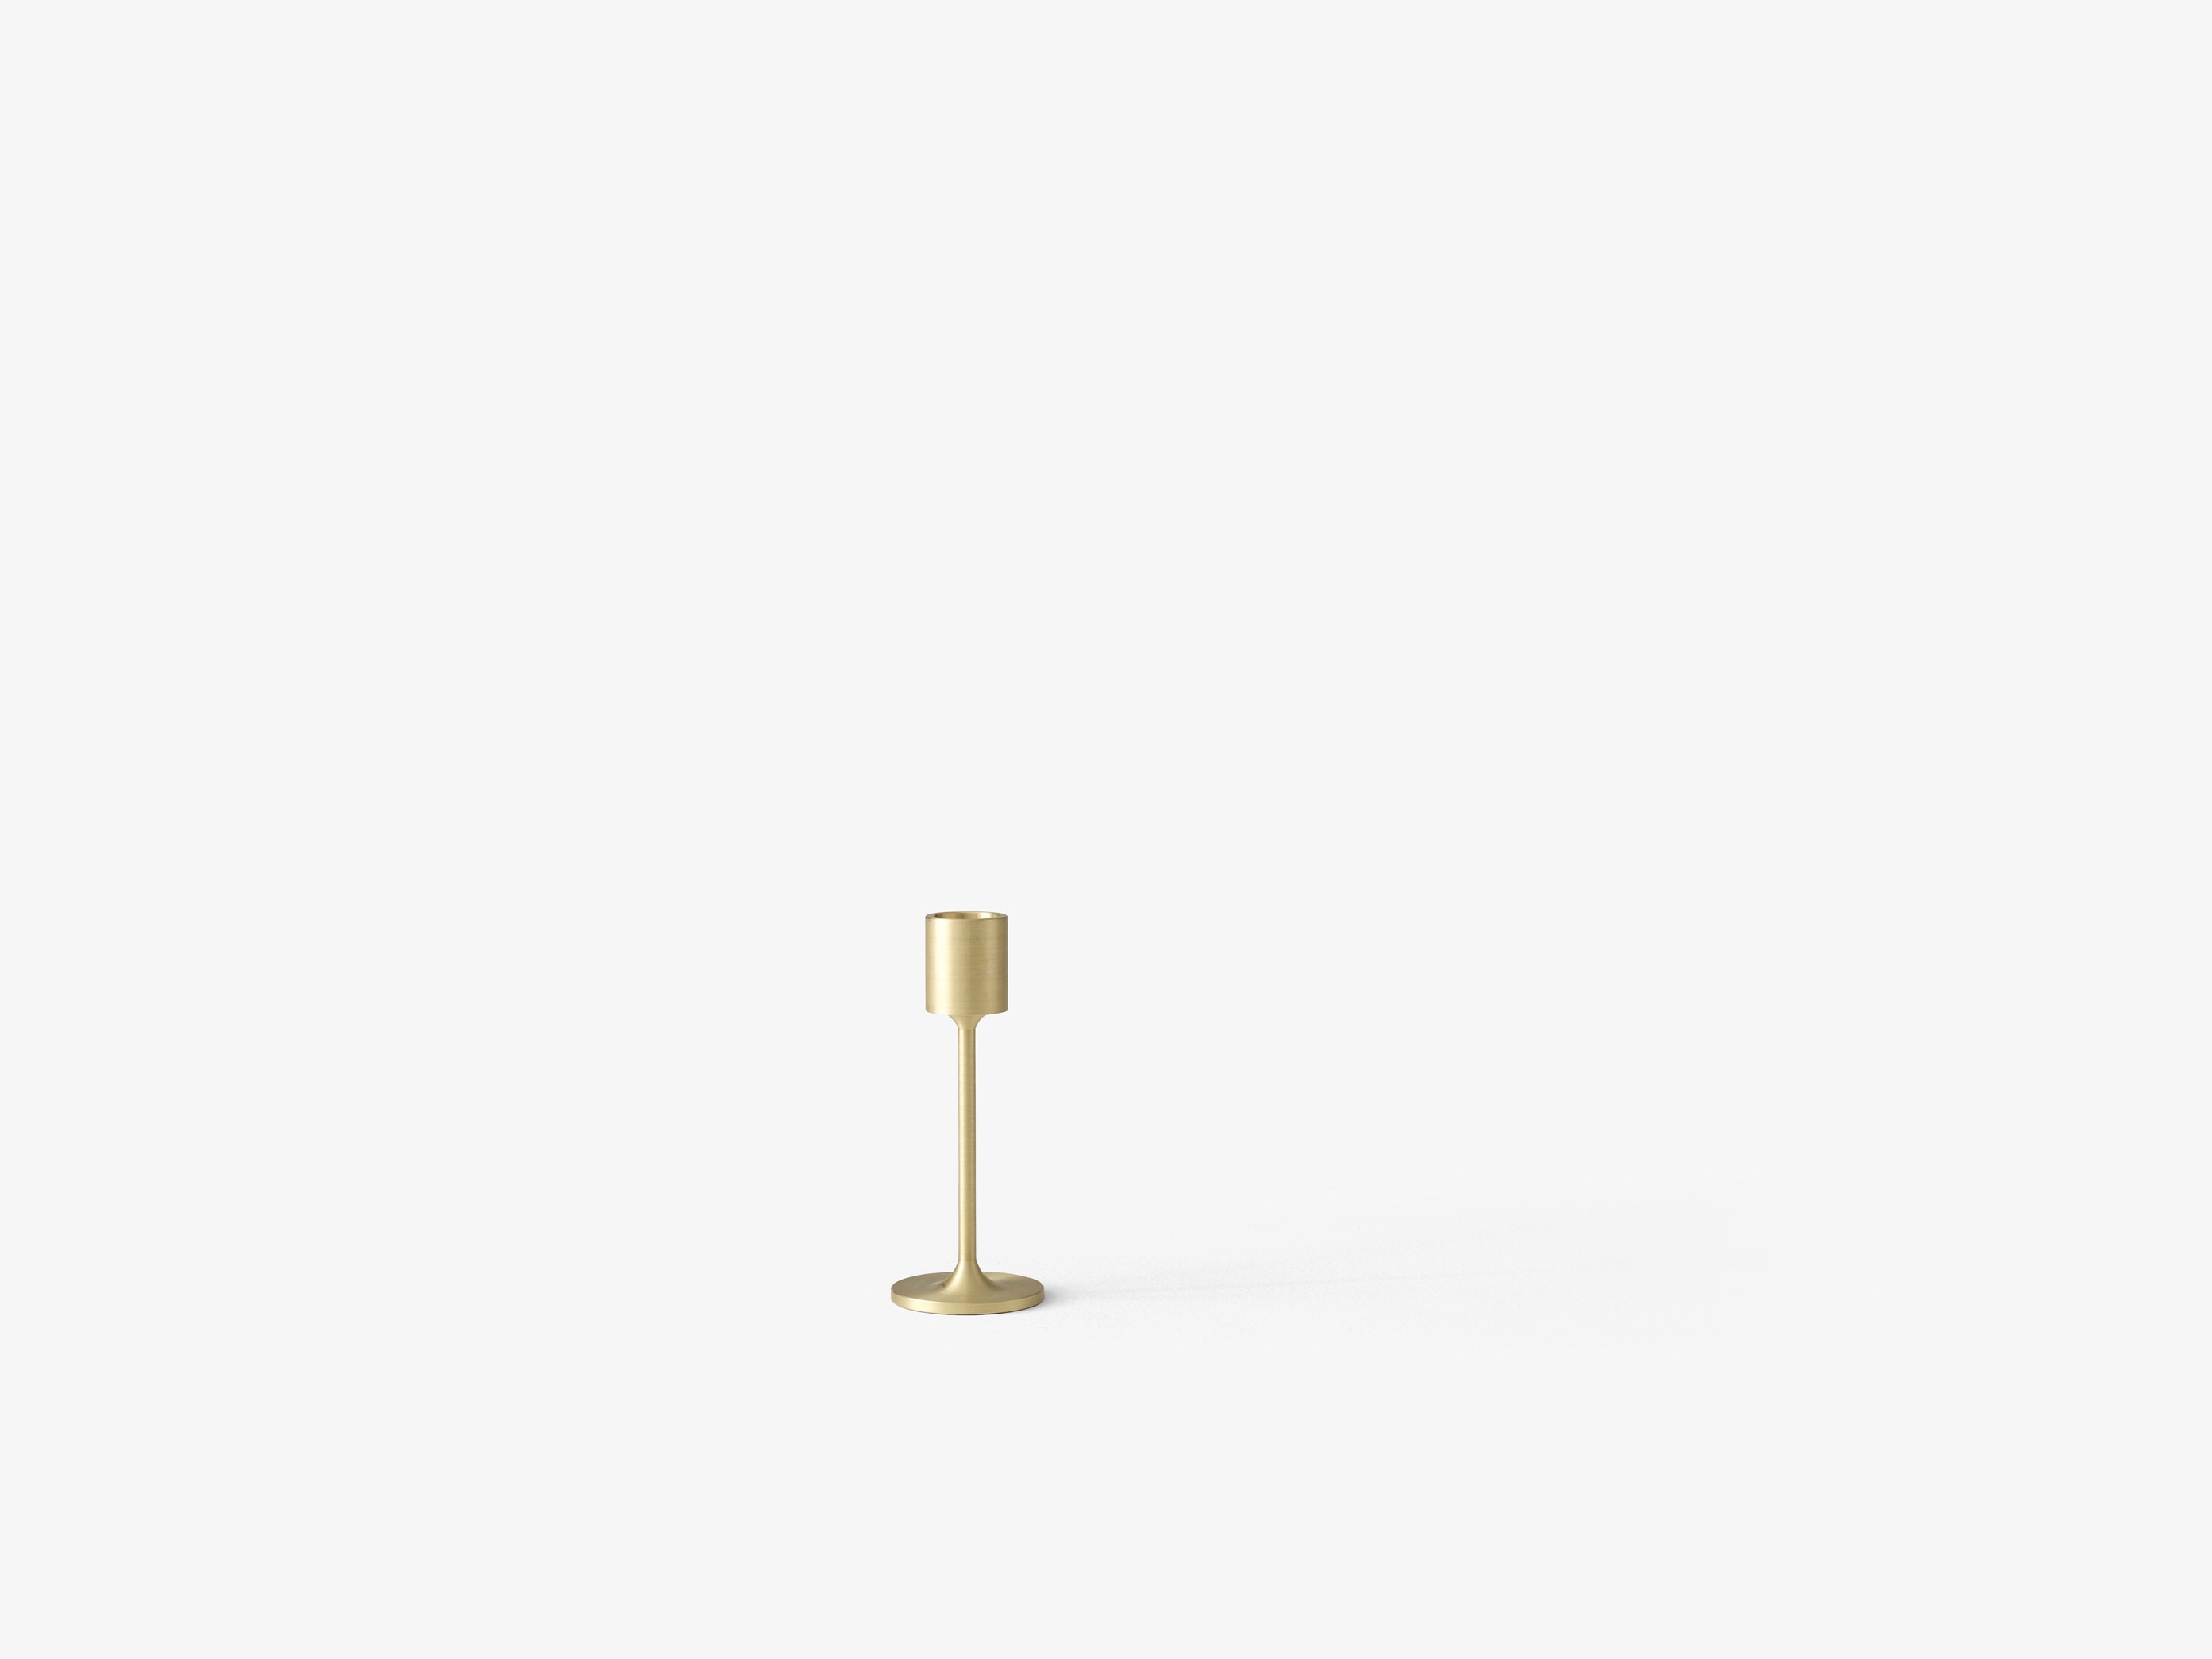 &Tradition Collect | Candleholders SC58 Space Copenhagen 2021